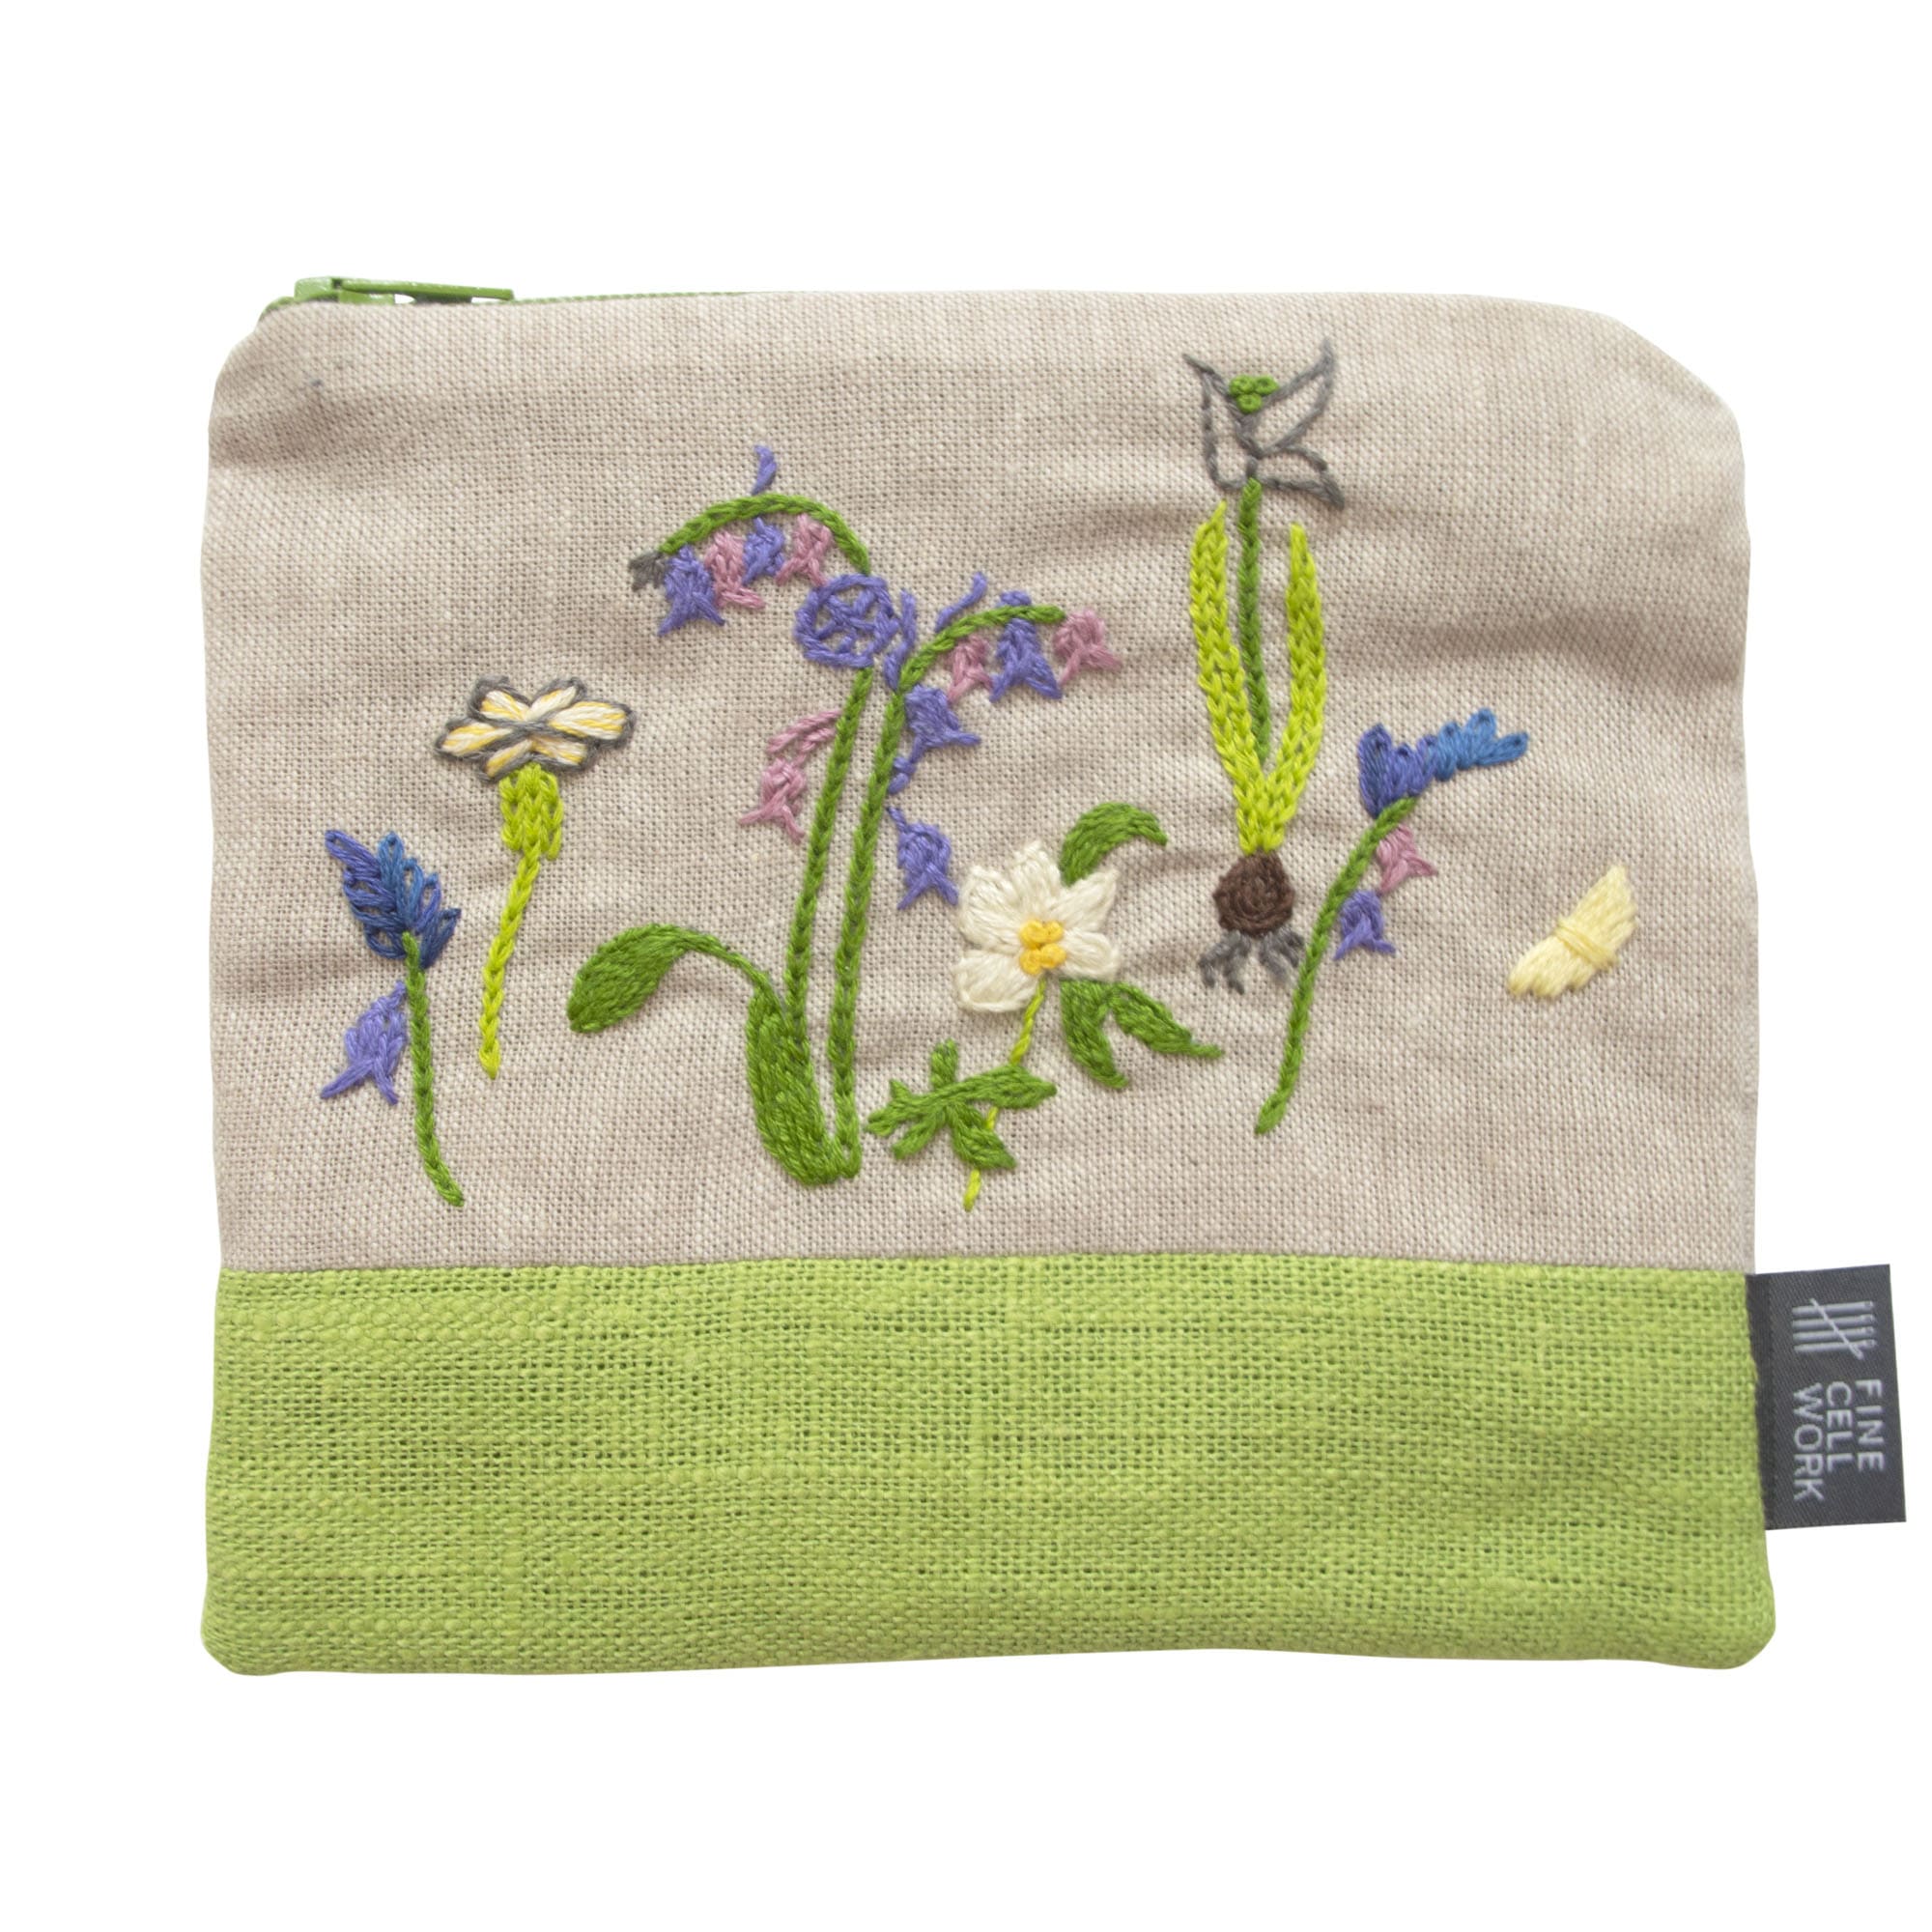 Fine Cell Work Hand-Embroidered Plantlife Linen Purse Floral Insects Green Grey Purple Handmade in Prison